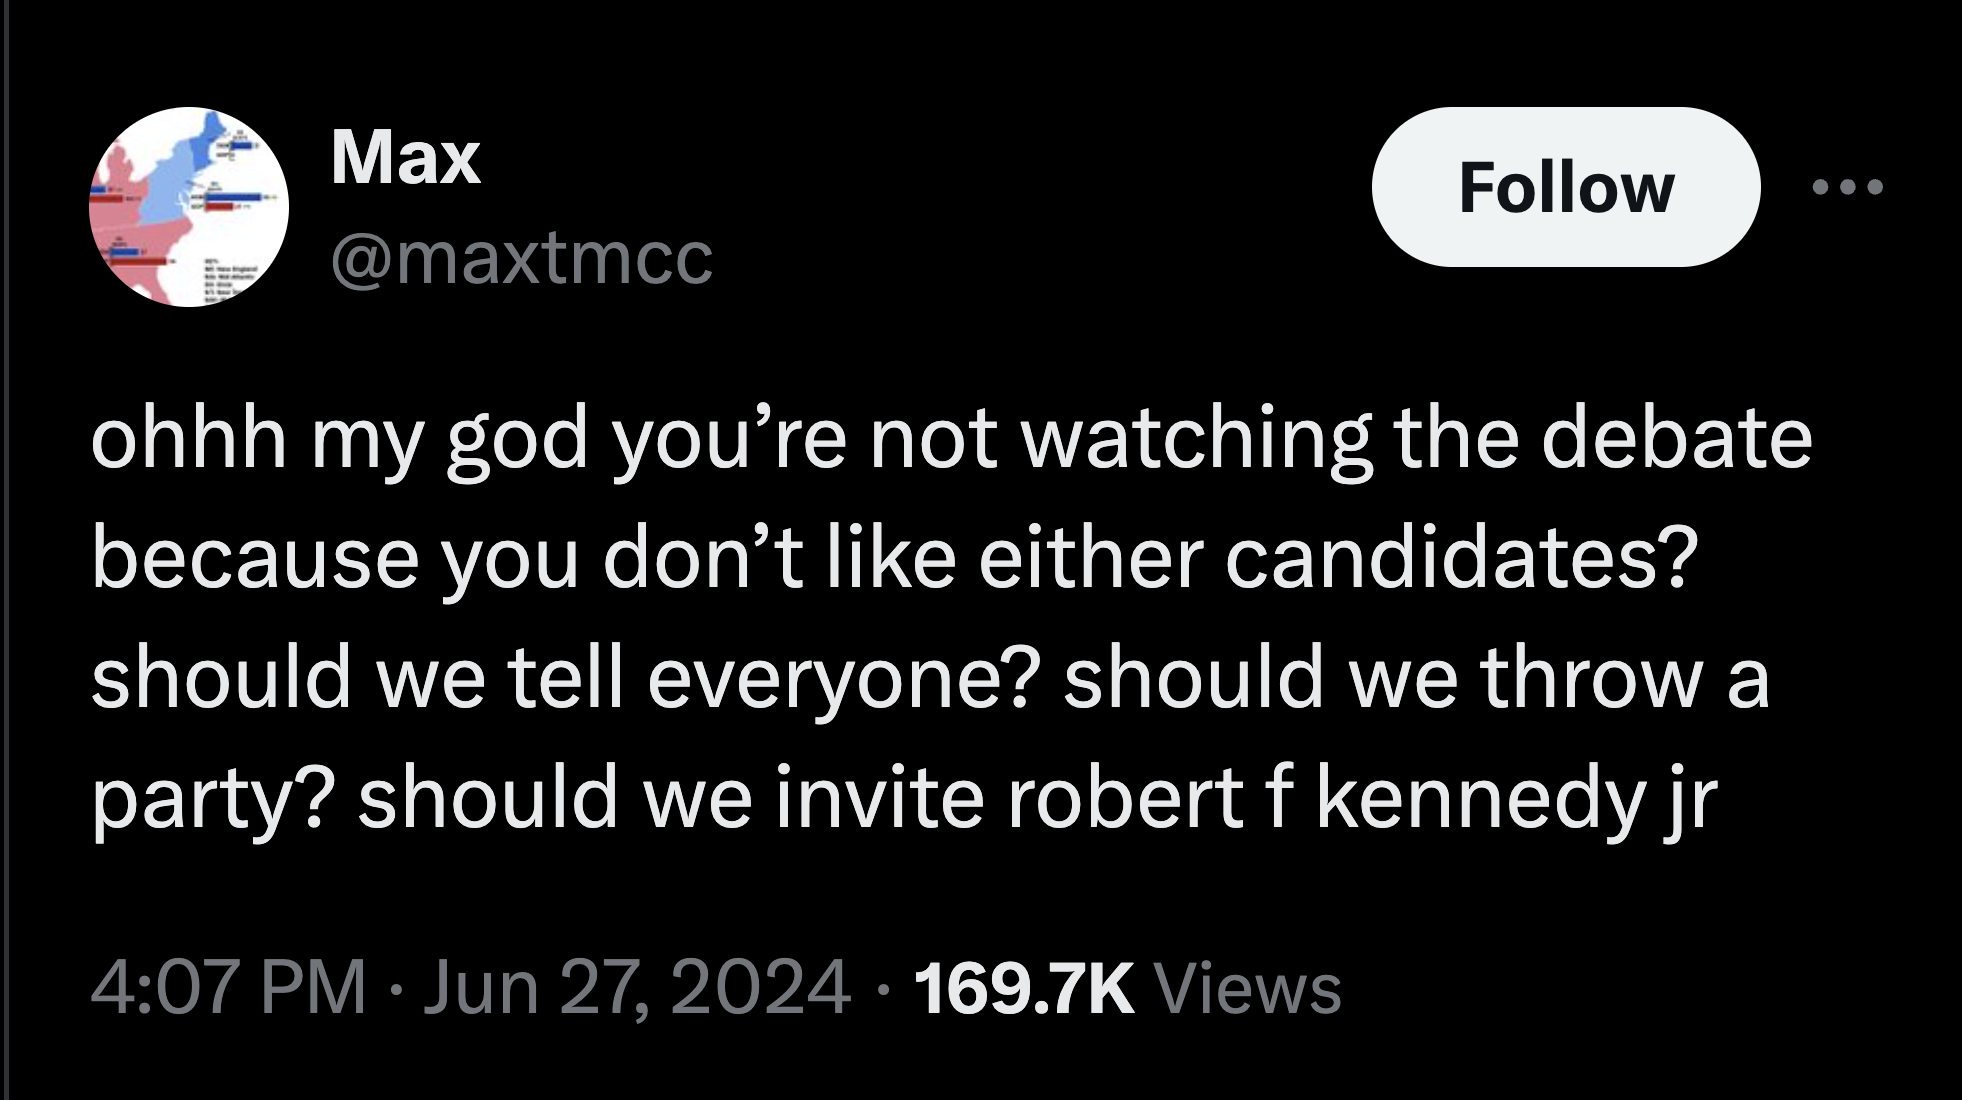 screenshot - Max ohhh my god you're not watching the debate because you don't either candidates? should we tell everyone? should we throw a party? should we invite robert f kennedy jr Views